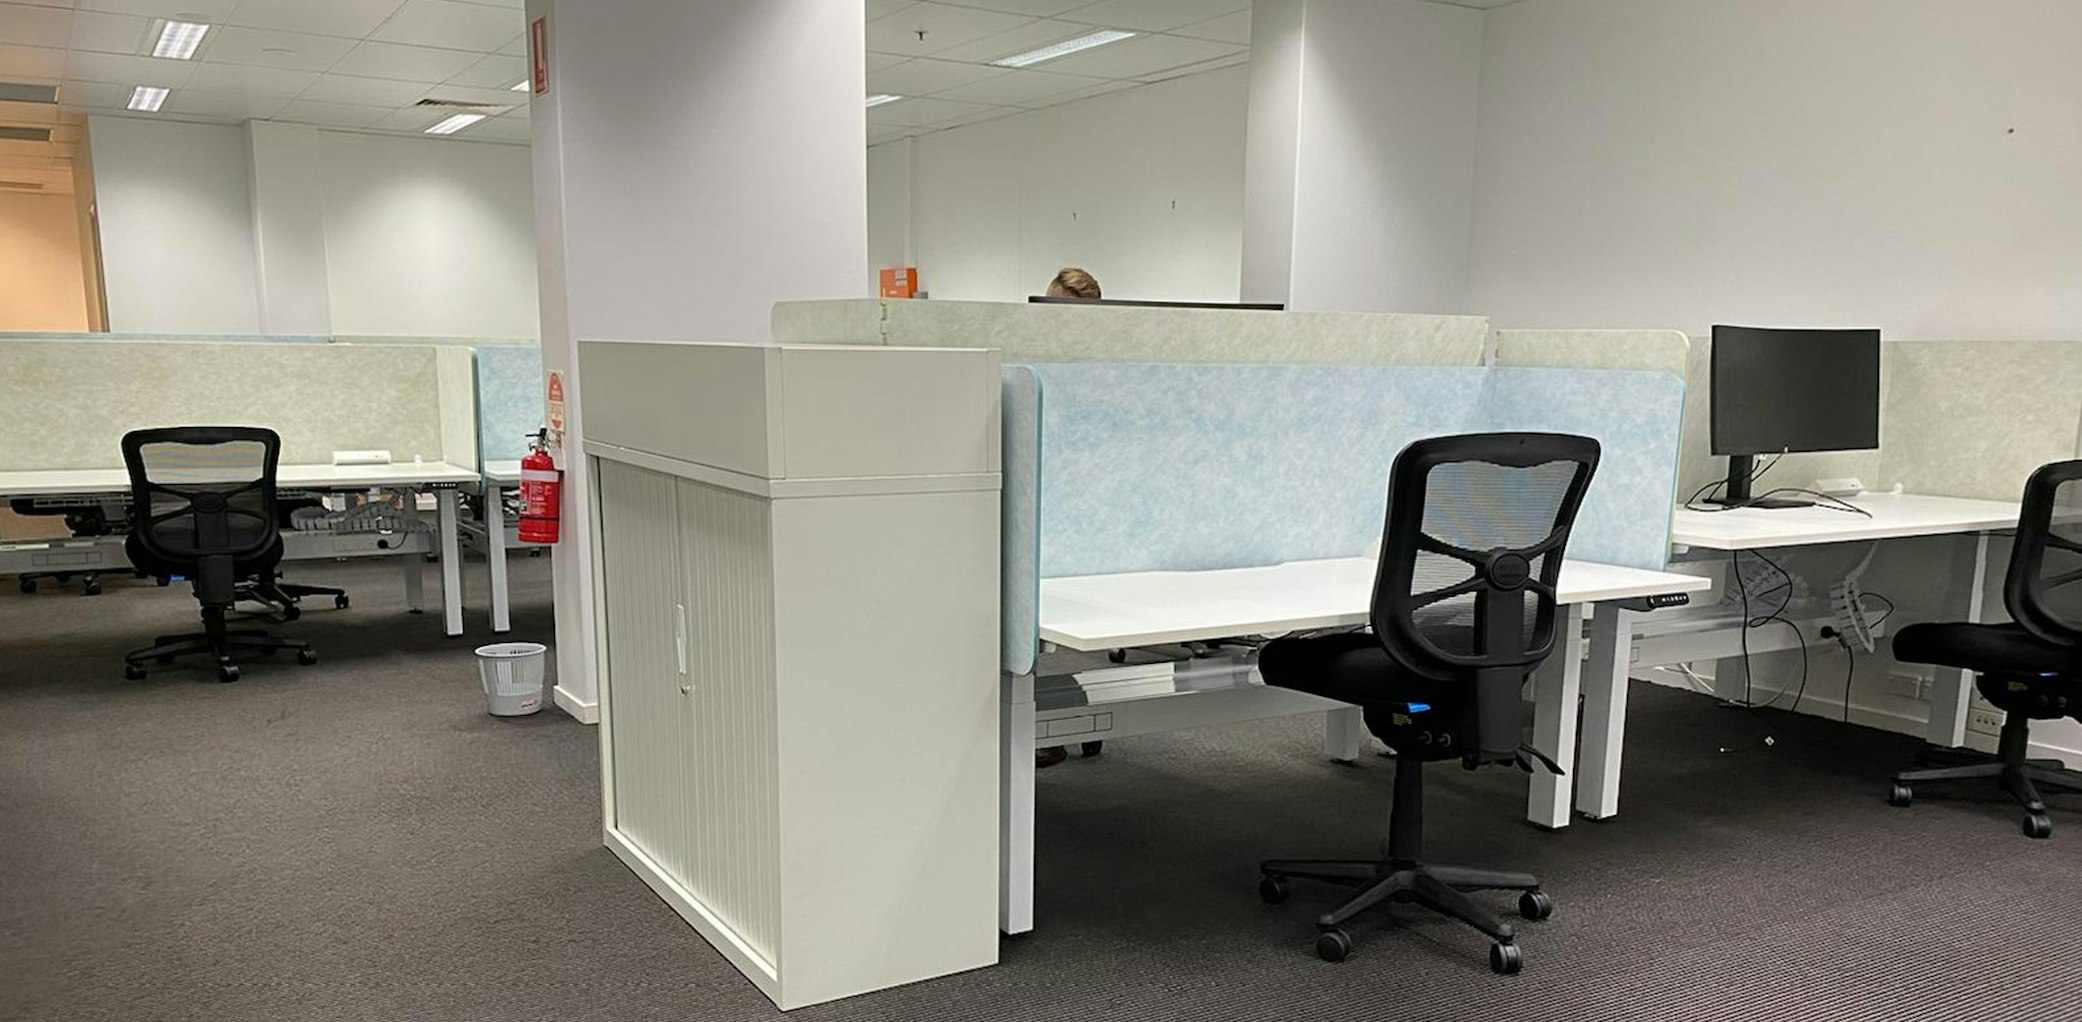 Commercial-Completed-Projects CSO-Lismore-Tweed-Heads-Office-Fitout cso-lismore-tweed-heads-office-fitout-banner-image-1